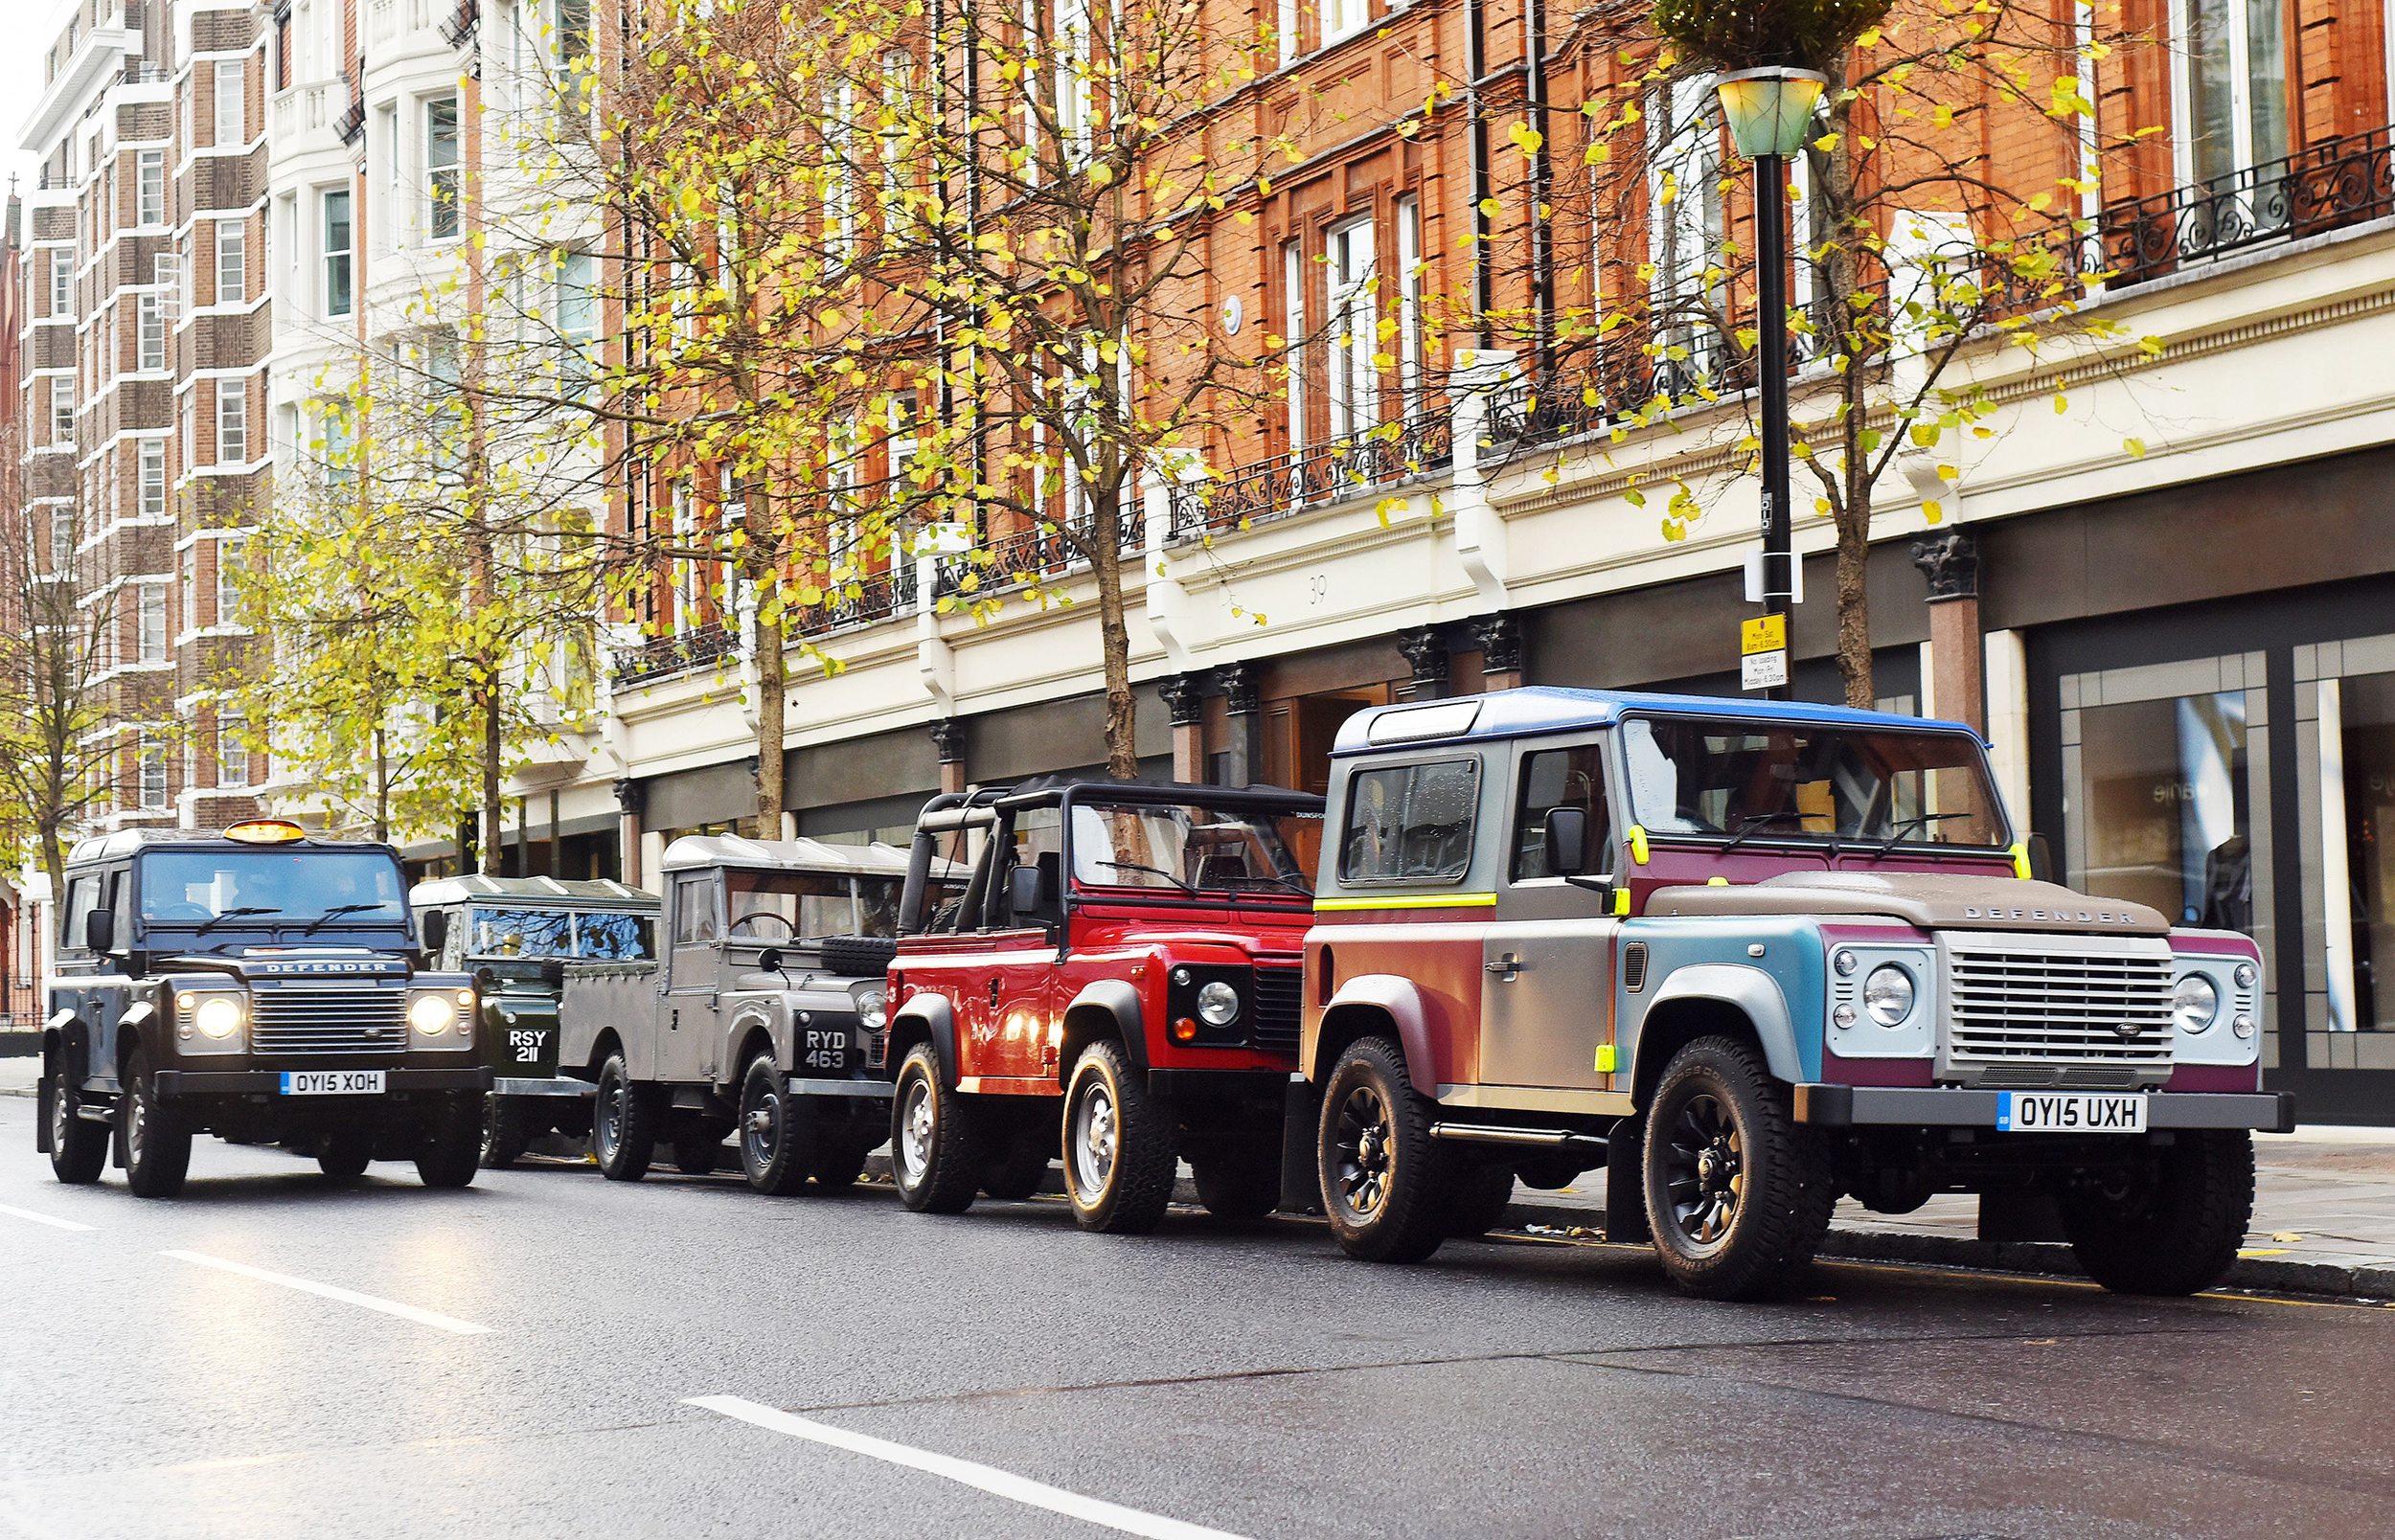 Land Rover 'taxi' tackles streets of London